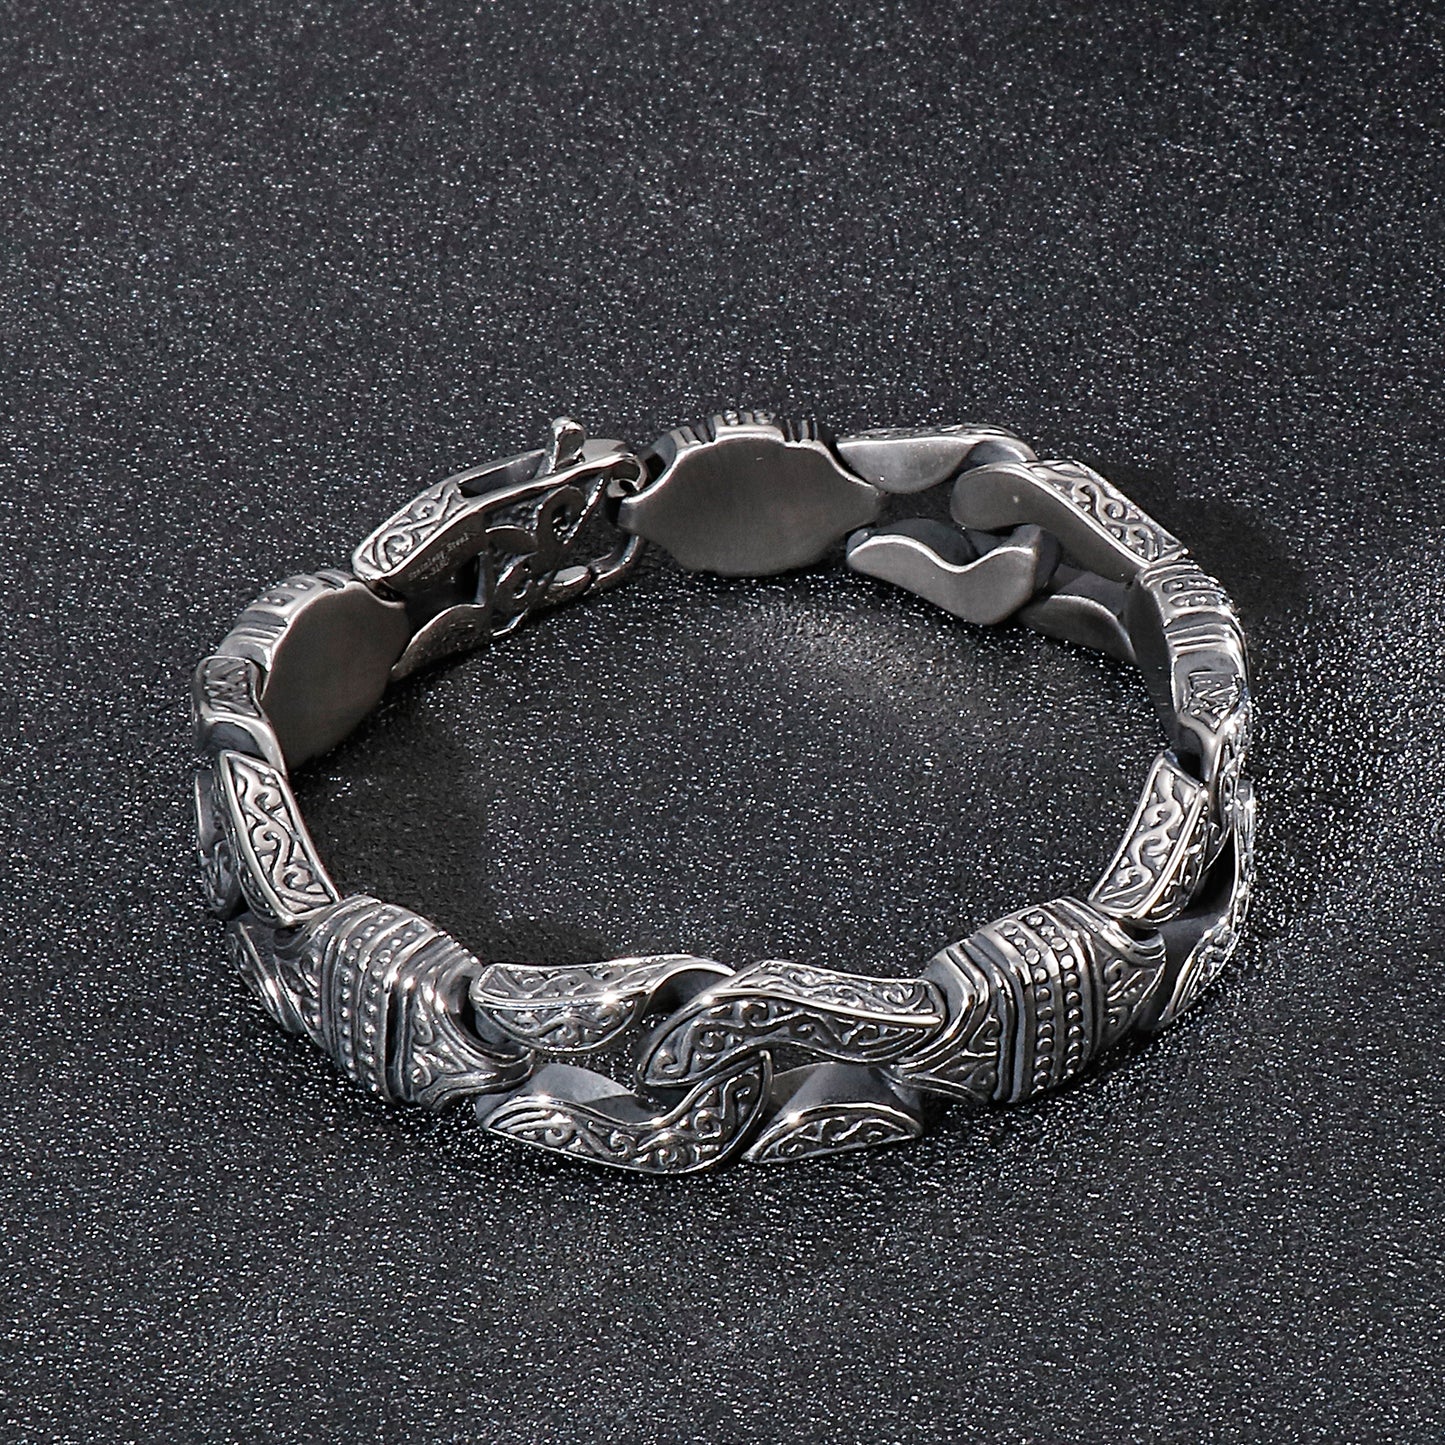 14mm Cool Boxing Stainless Unique Bracelet